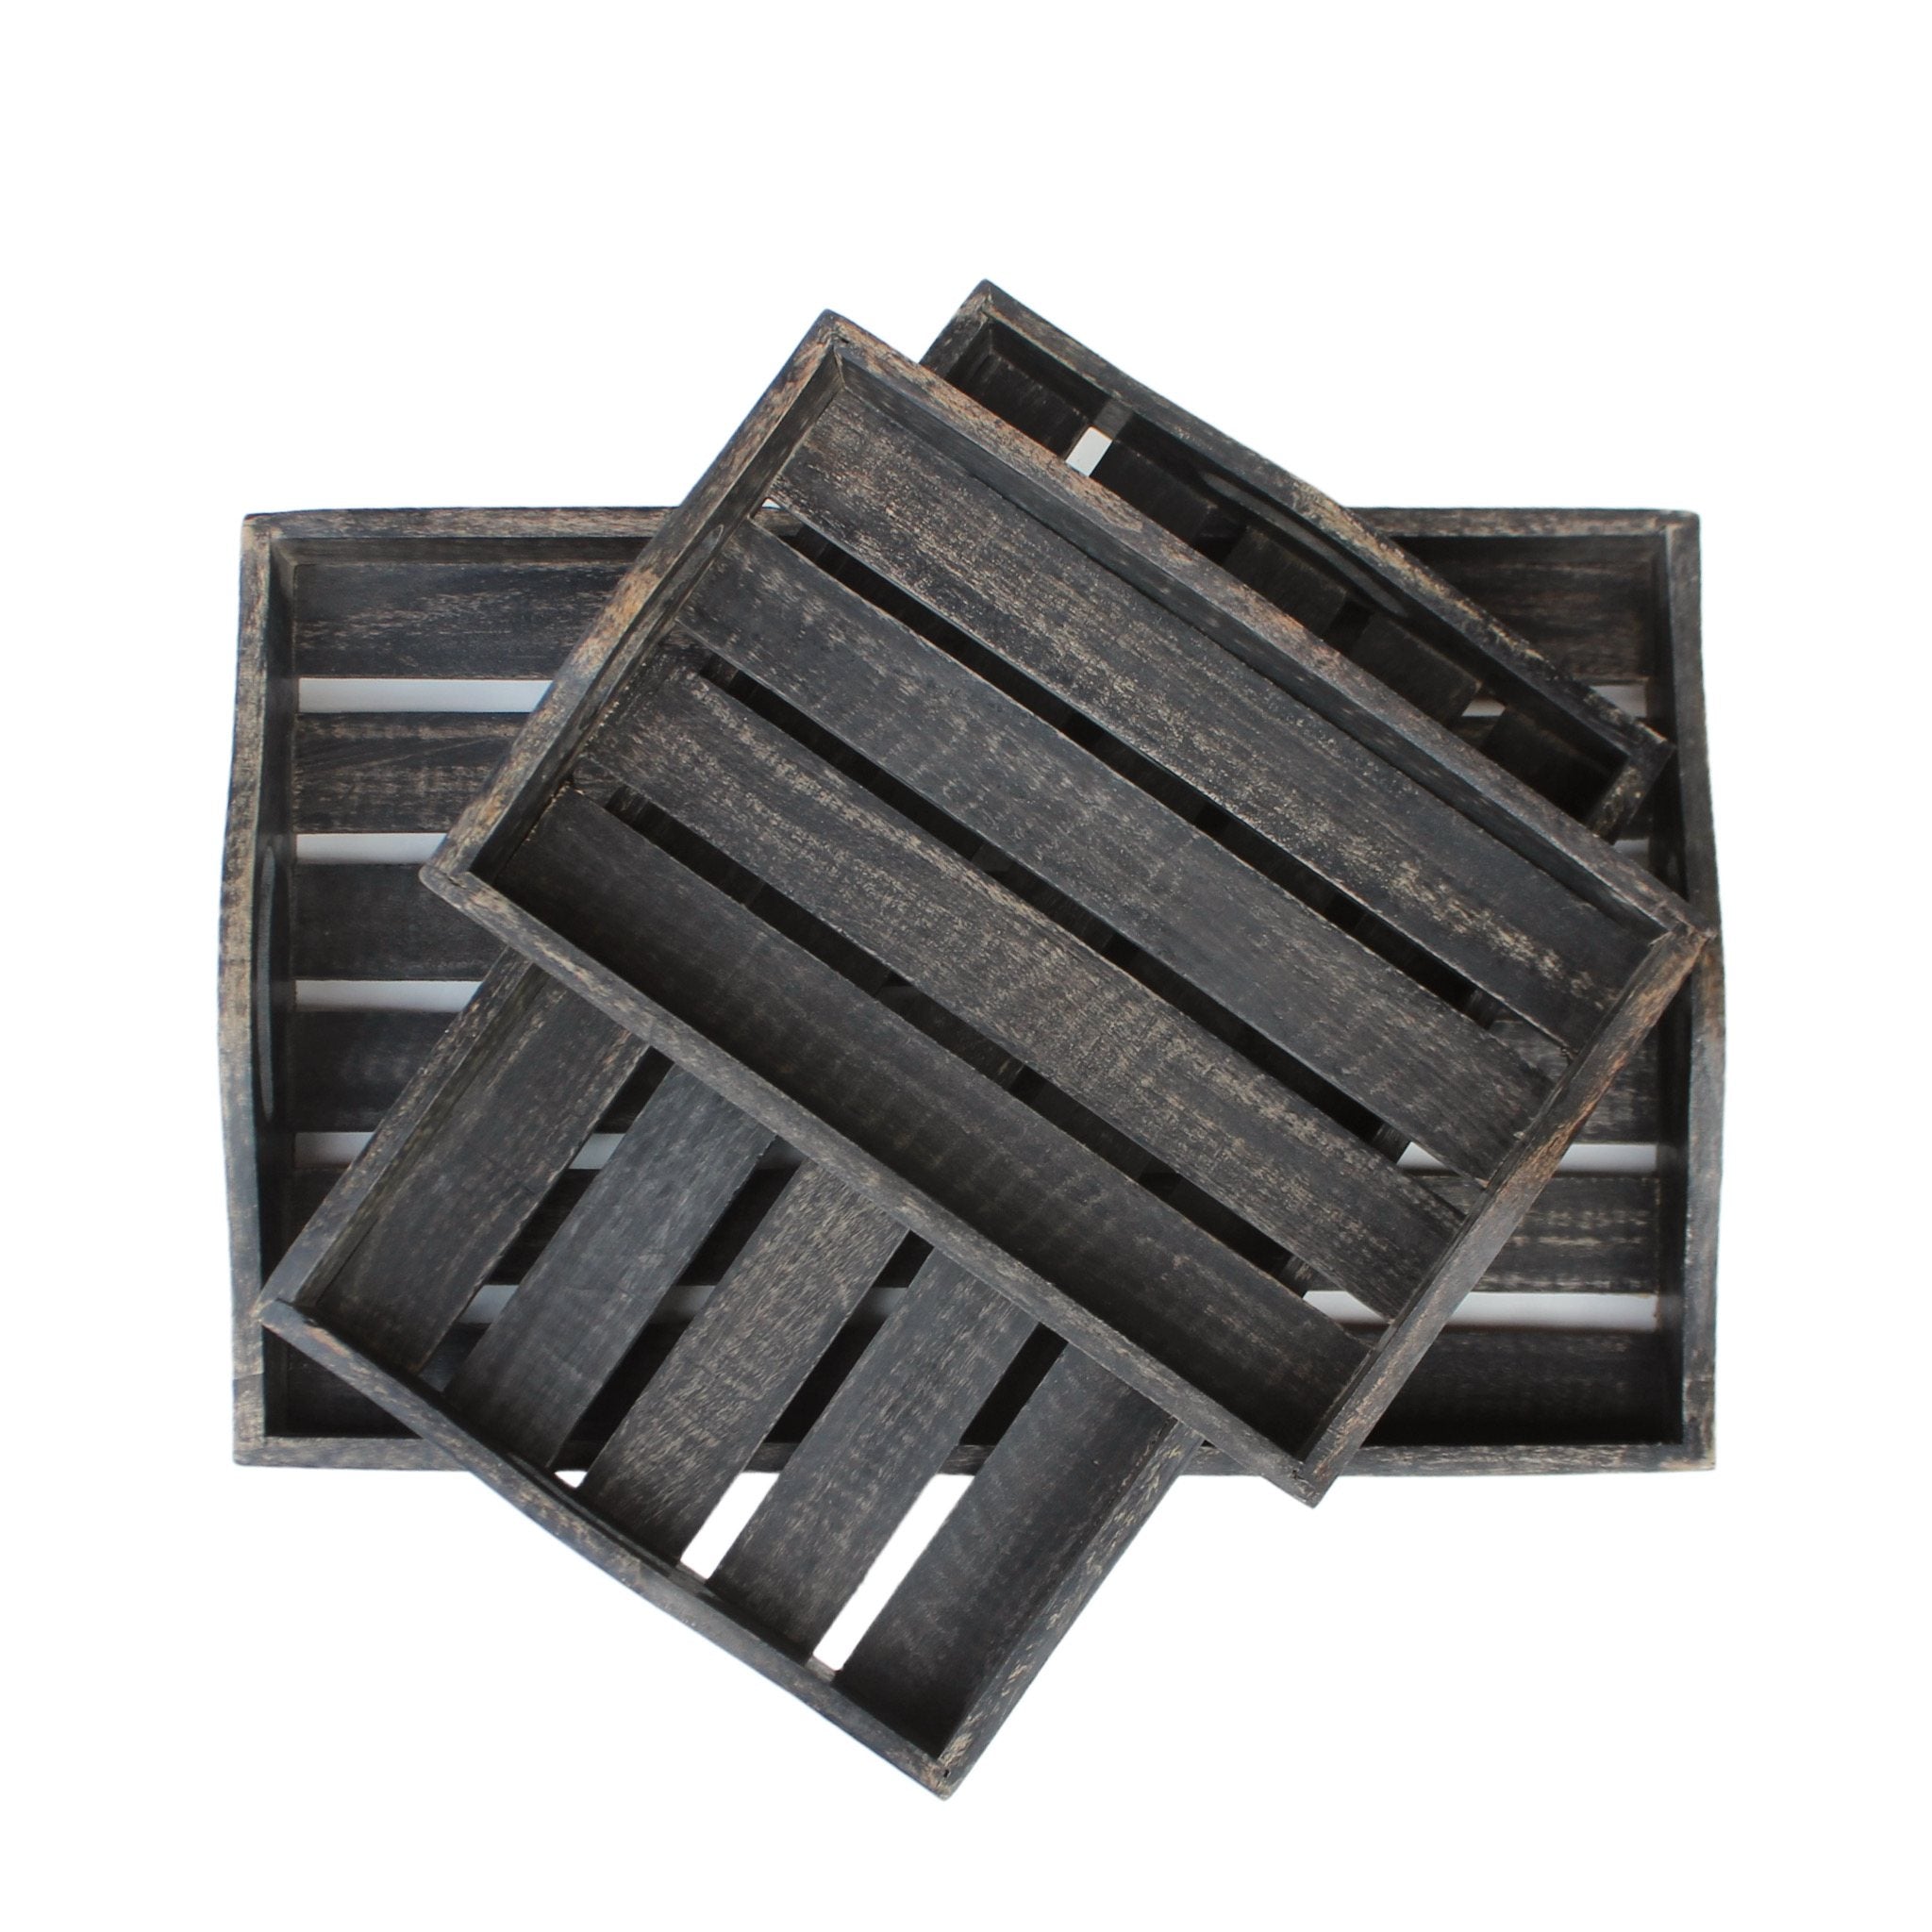 Barn Wood Serving Trays in Charcoal, Set of 3